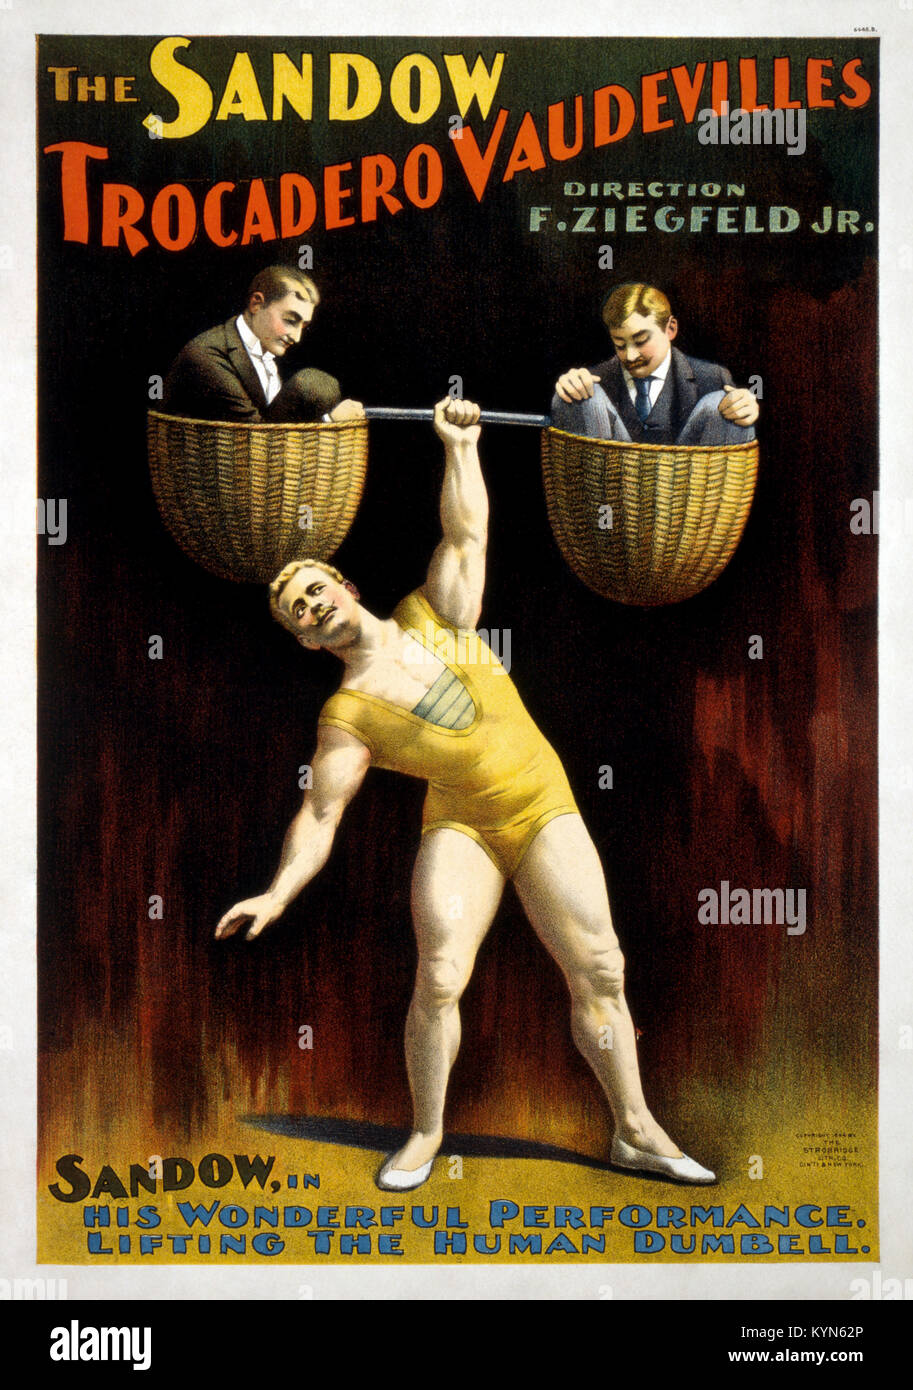 Eugen Sandow, pioneering German bodybuilder, known as the 'father of modern bodybuilding'. Eugen Sandow in 1894 poster for the Sandow Trocadero Vaudevilles, produced by F. Ziegfeld, Jr. in one of his first productions Stock Photo